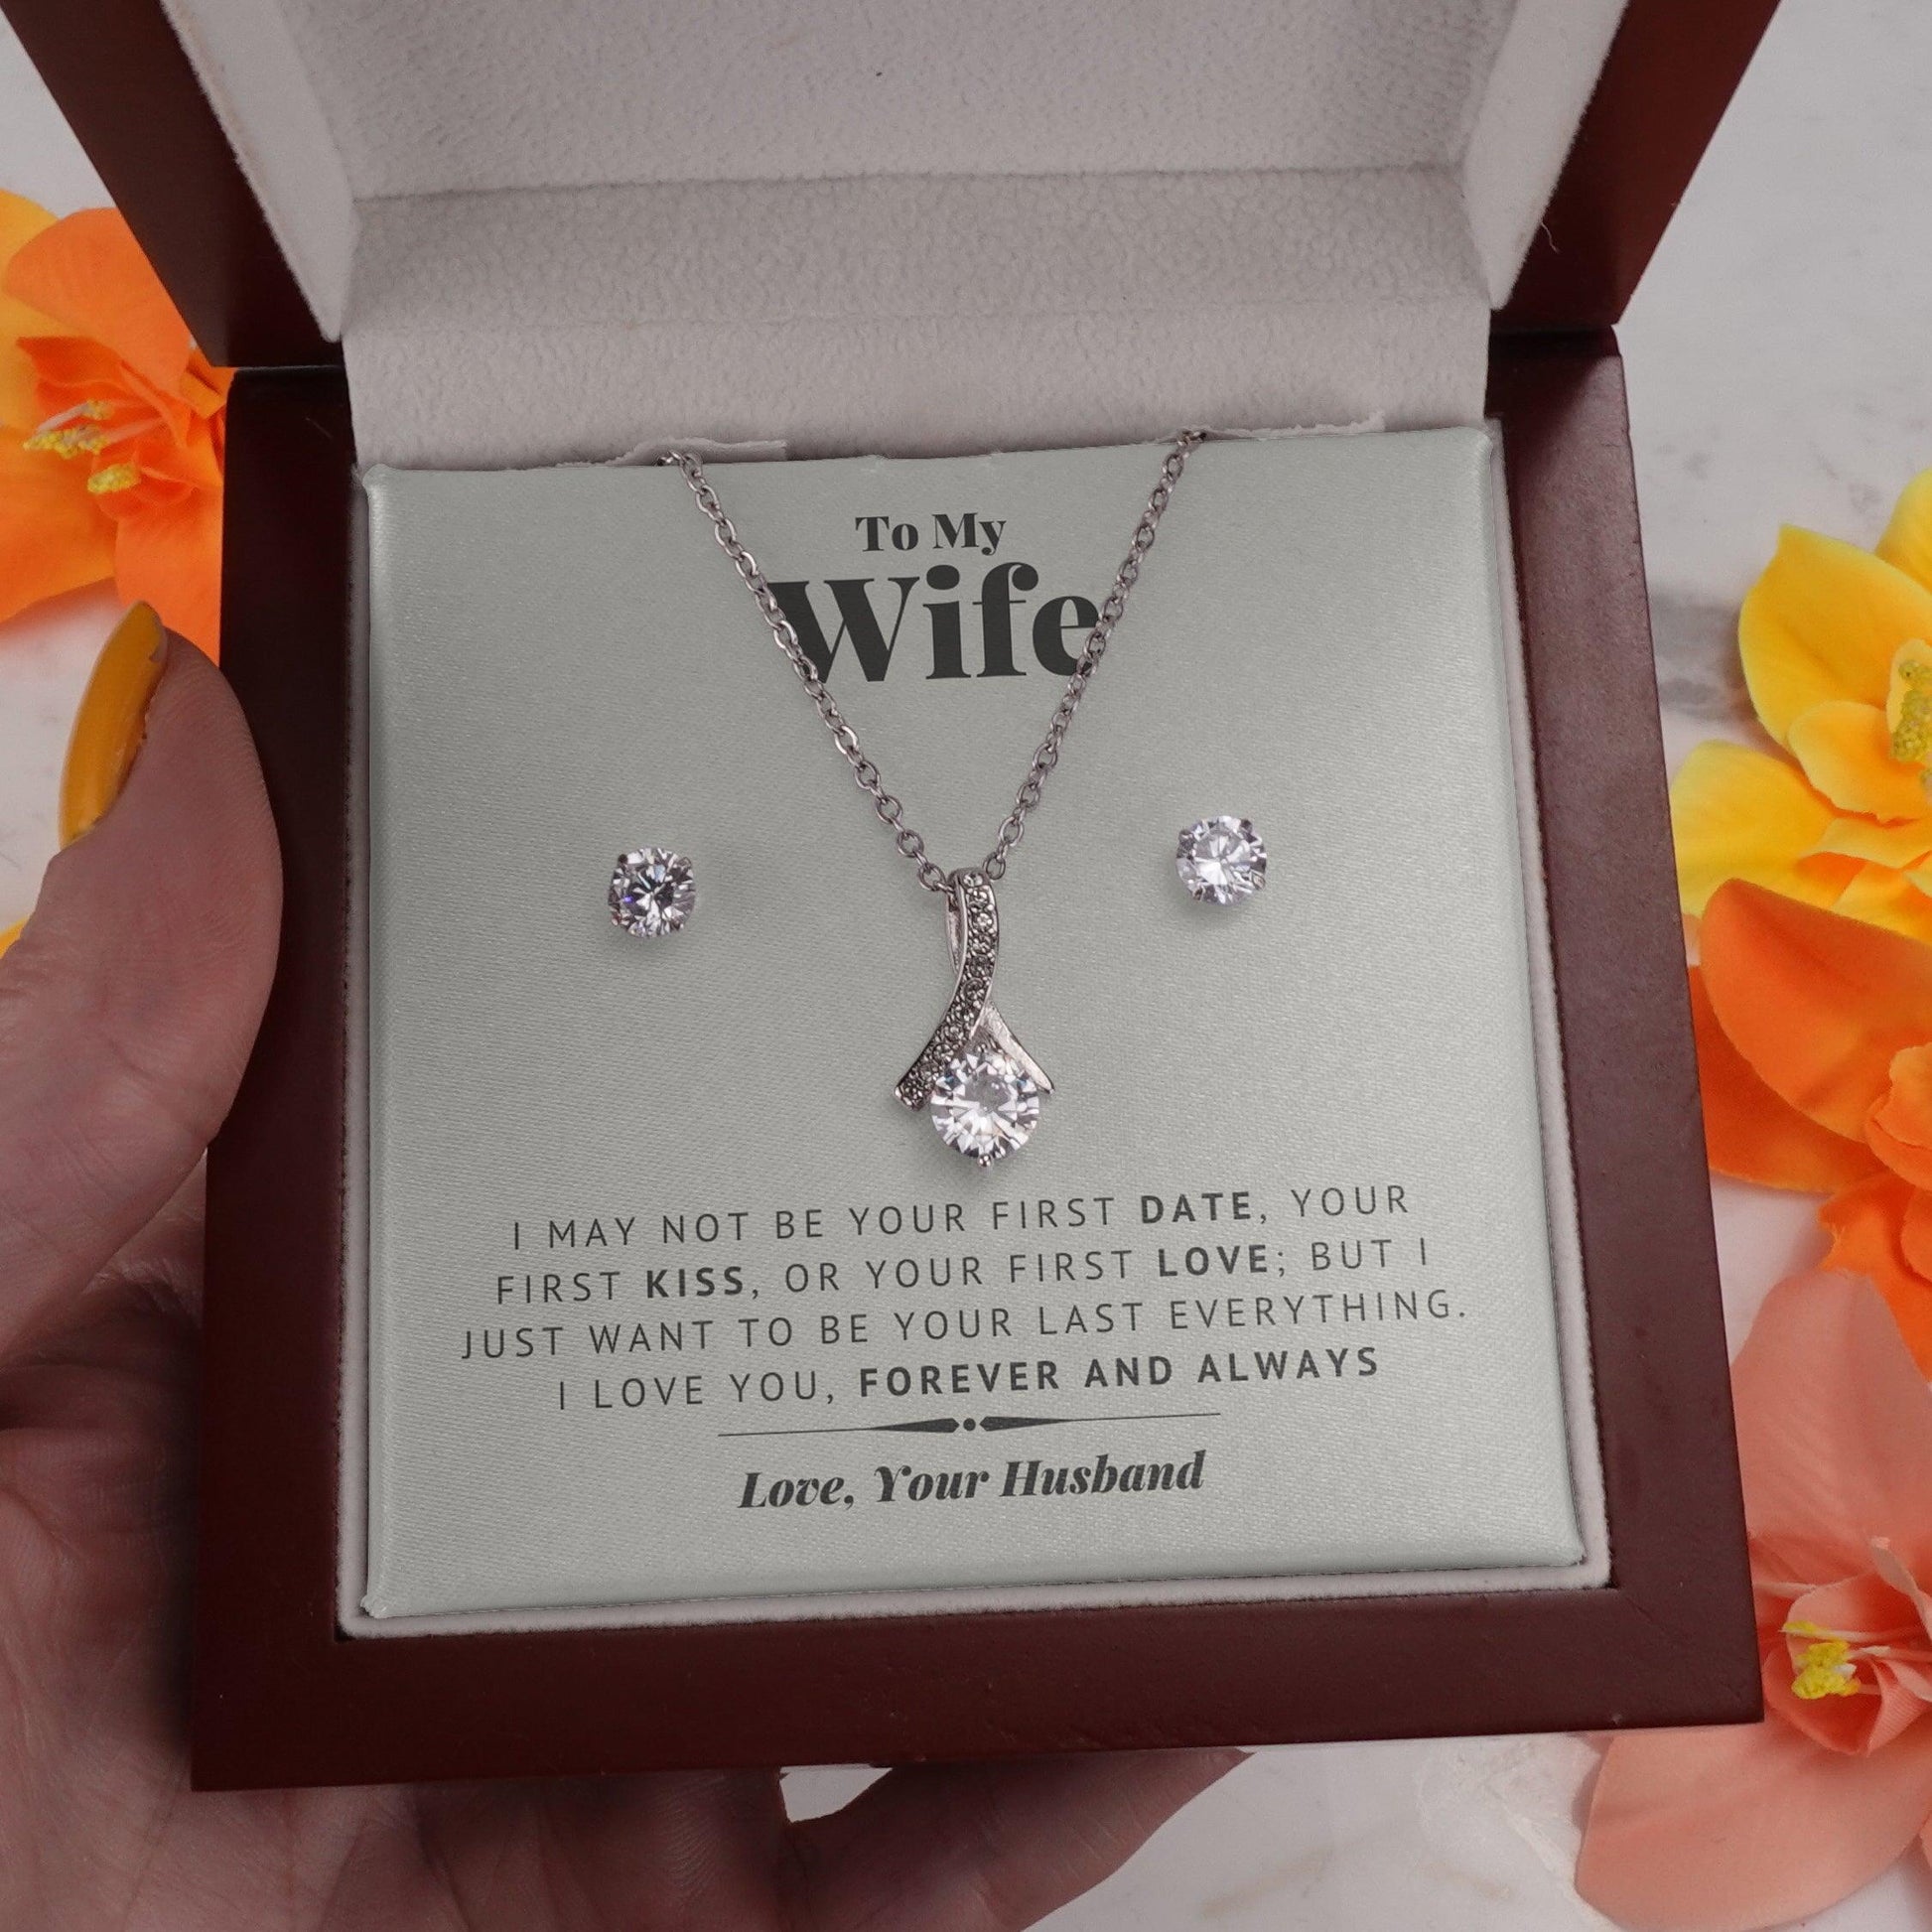 Jewelry gifts Wife - Amazing Alluring Gift Set - Belesmé - Memorable Jewelry Gifts 